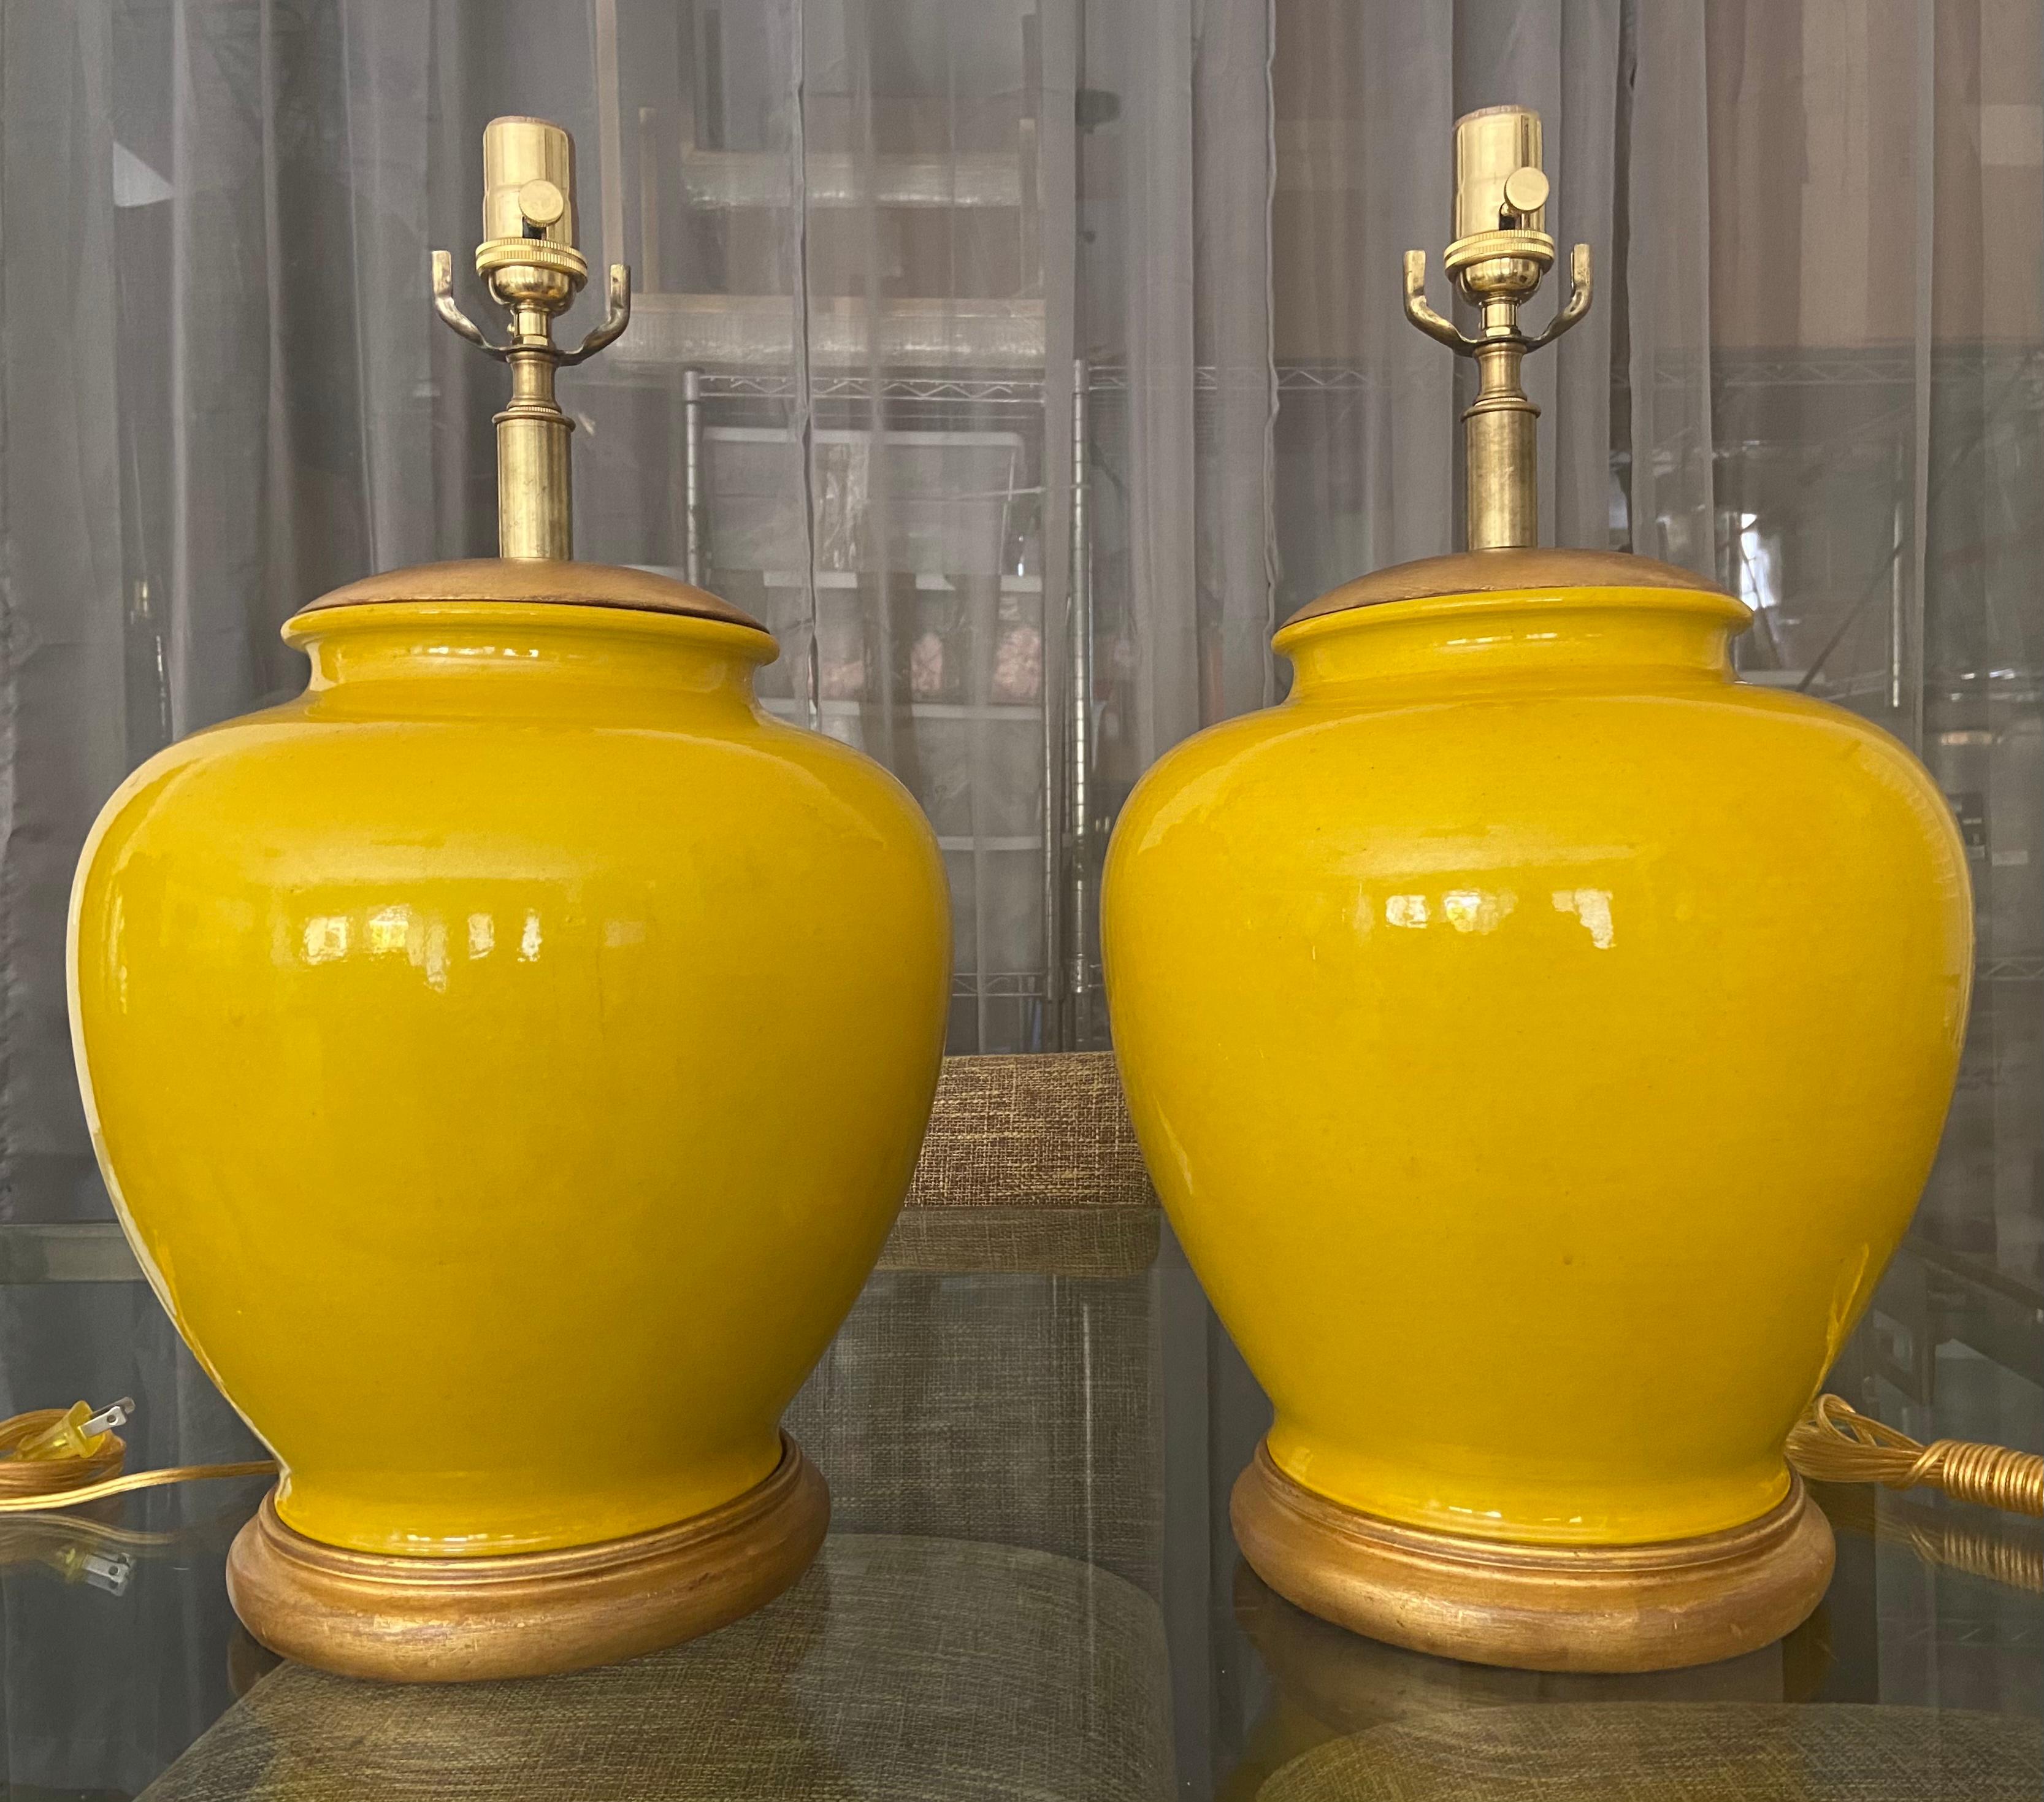 Pair of large Japanese vibrant yellow colored porcelain pot form shaped vases mounted on gilt antiqued turned wood lamp bases and lid. Newly wired with new brass 3 way sockets. Vase portion is 12